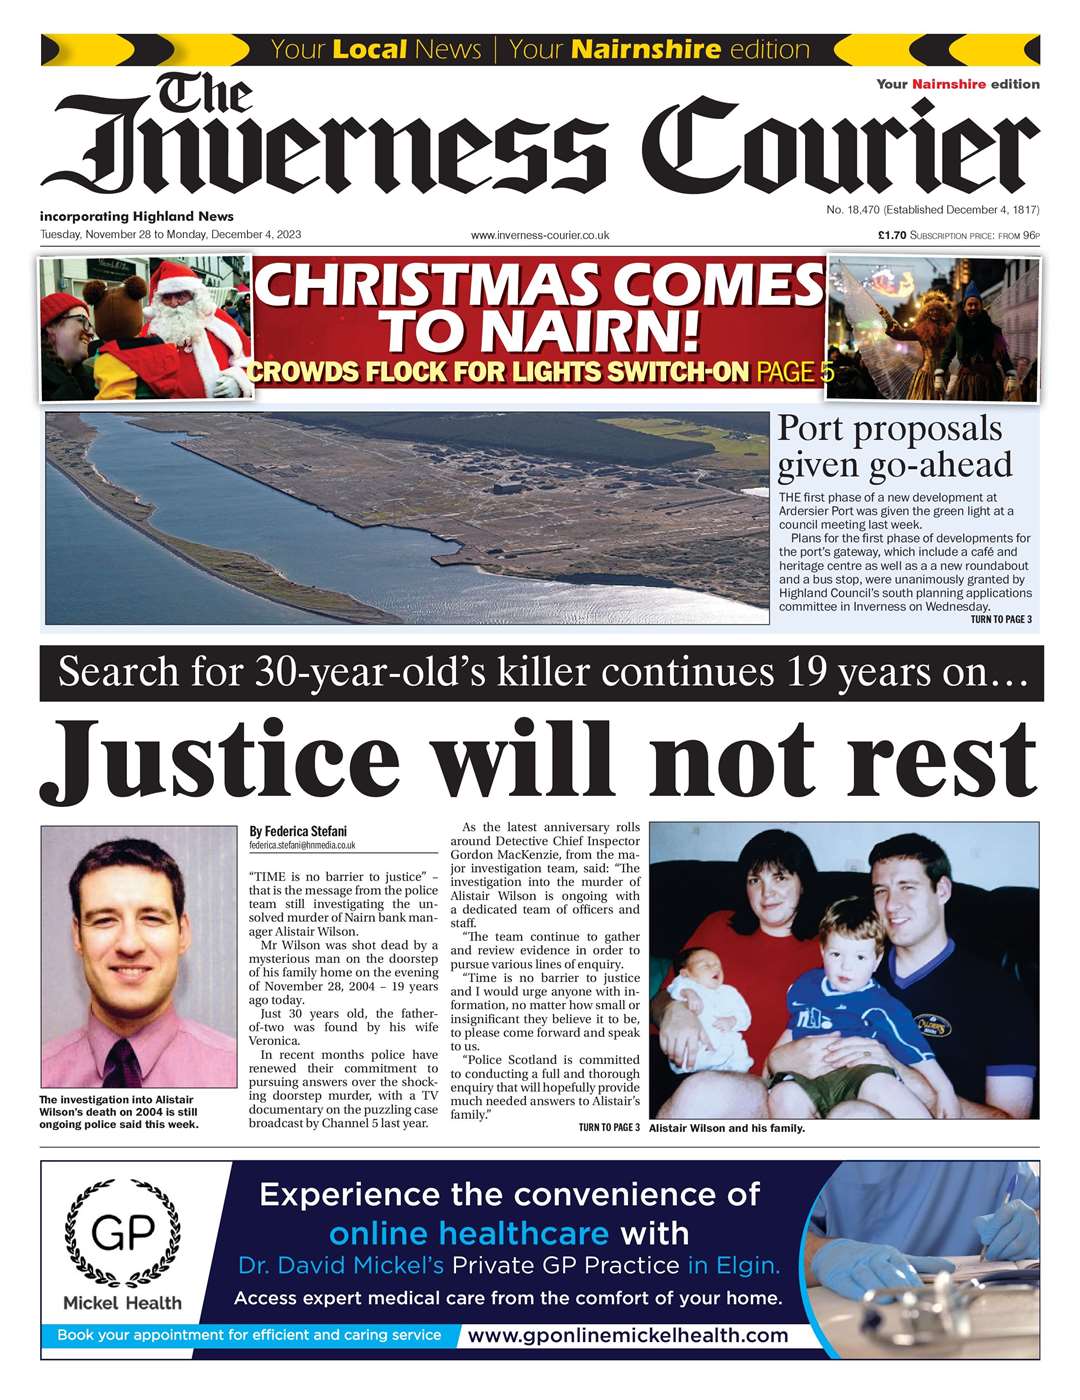 The Inverness Courier (Nairnshire edition), November 28, front page.